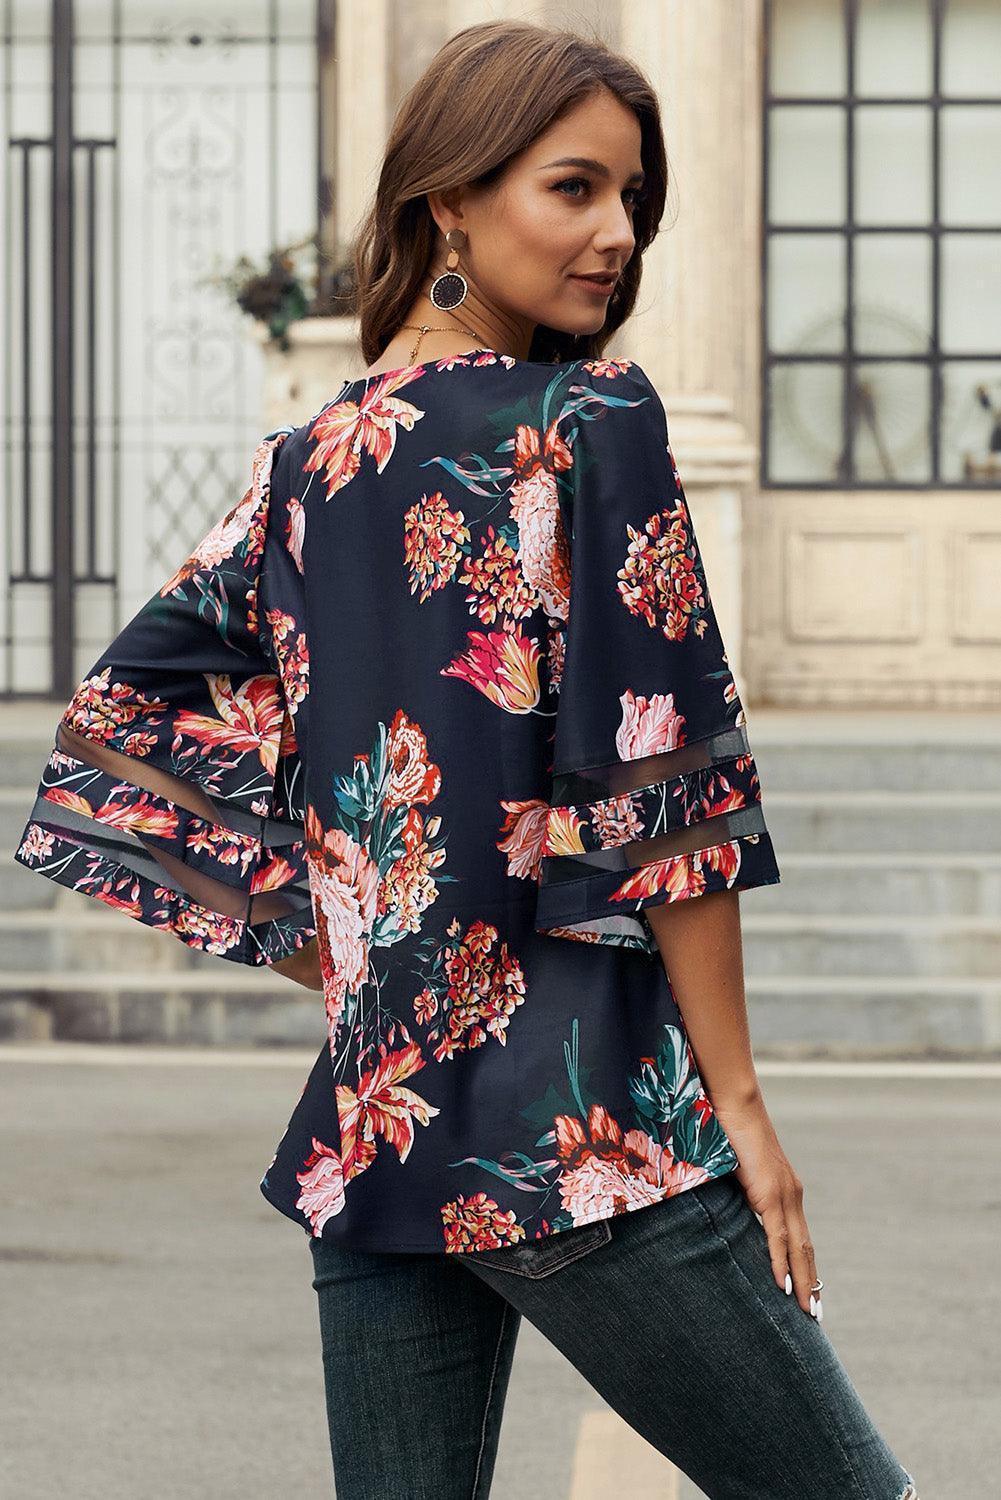 Instagrammable Floral Flare Sleeve Blouse - MXSTUDIO.COM